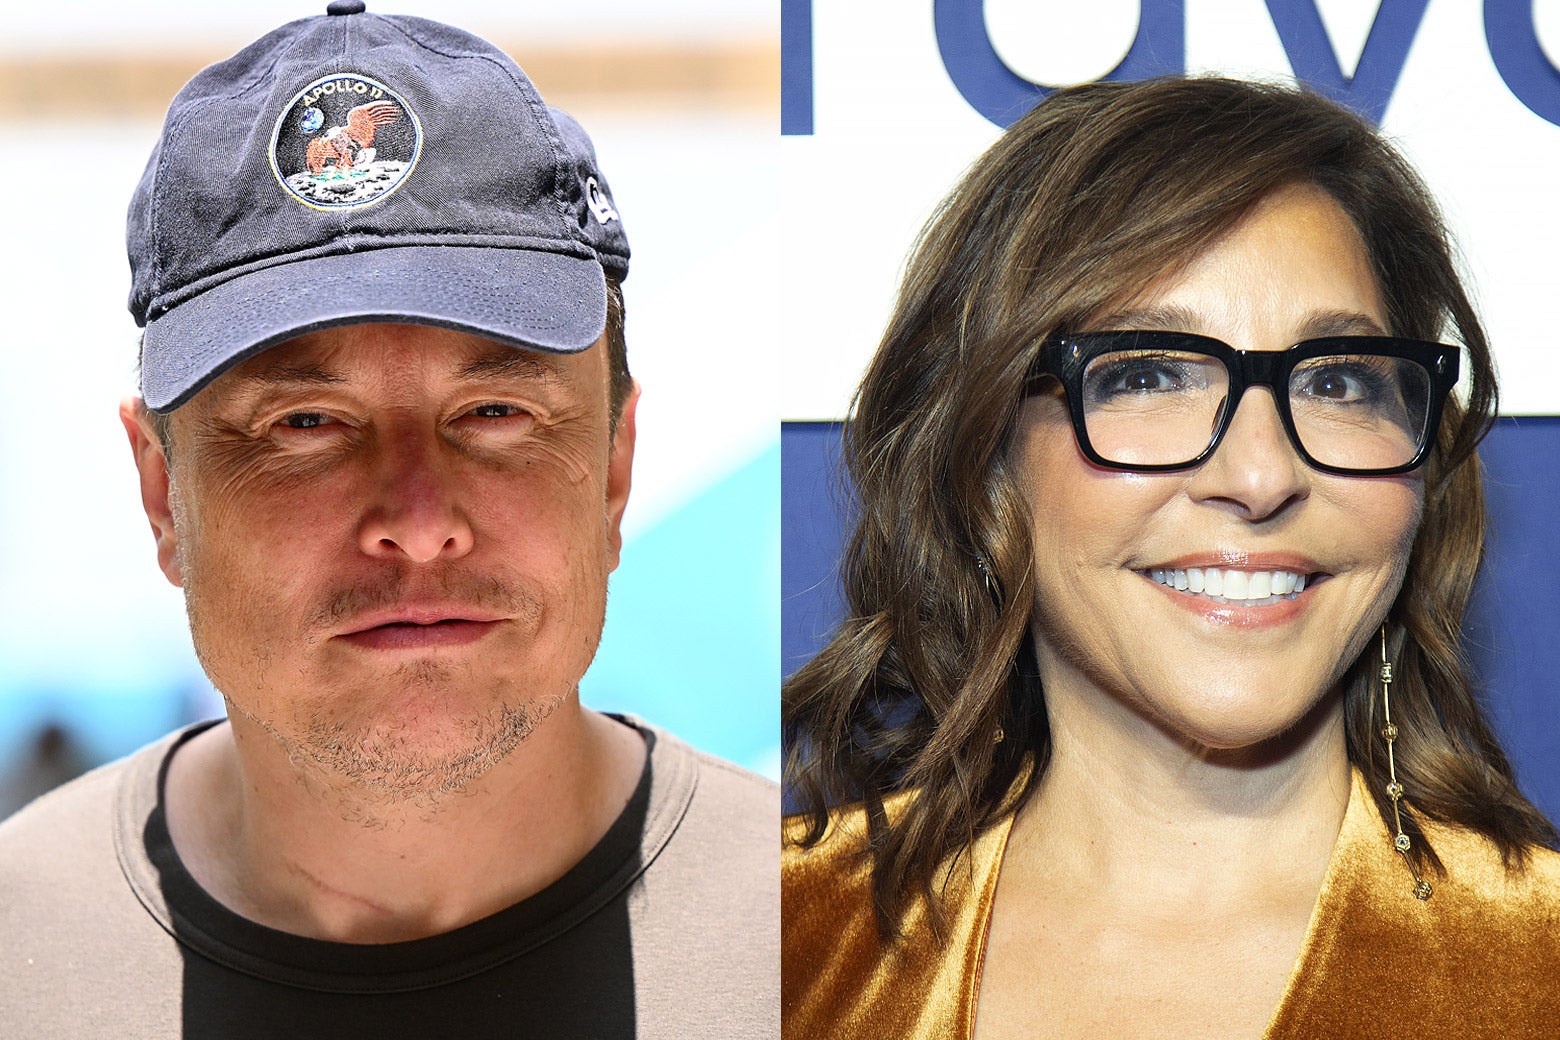 Elon Musk in a baseball cap, and Linda Yaccarino, a woman with brown hair and glasses.